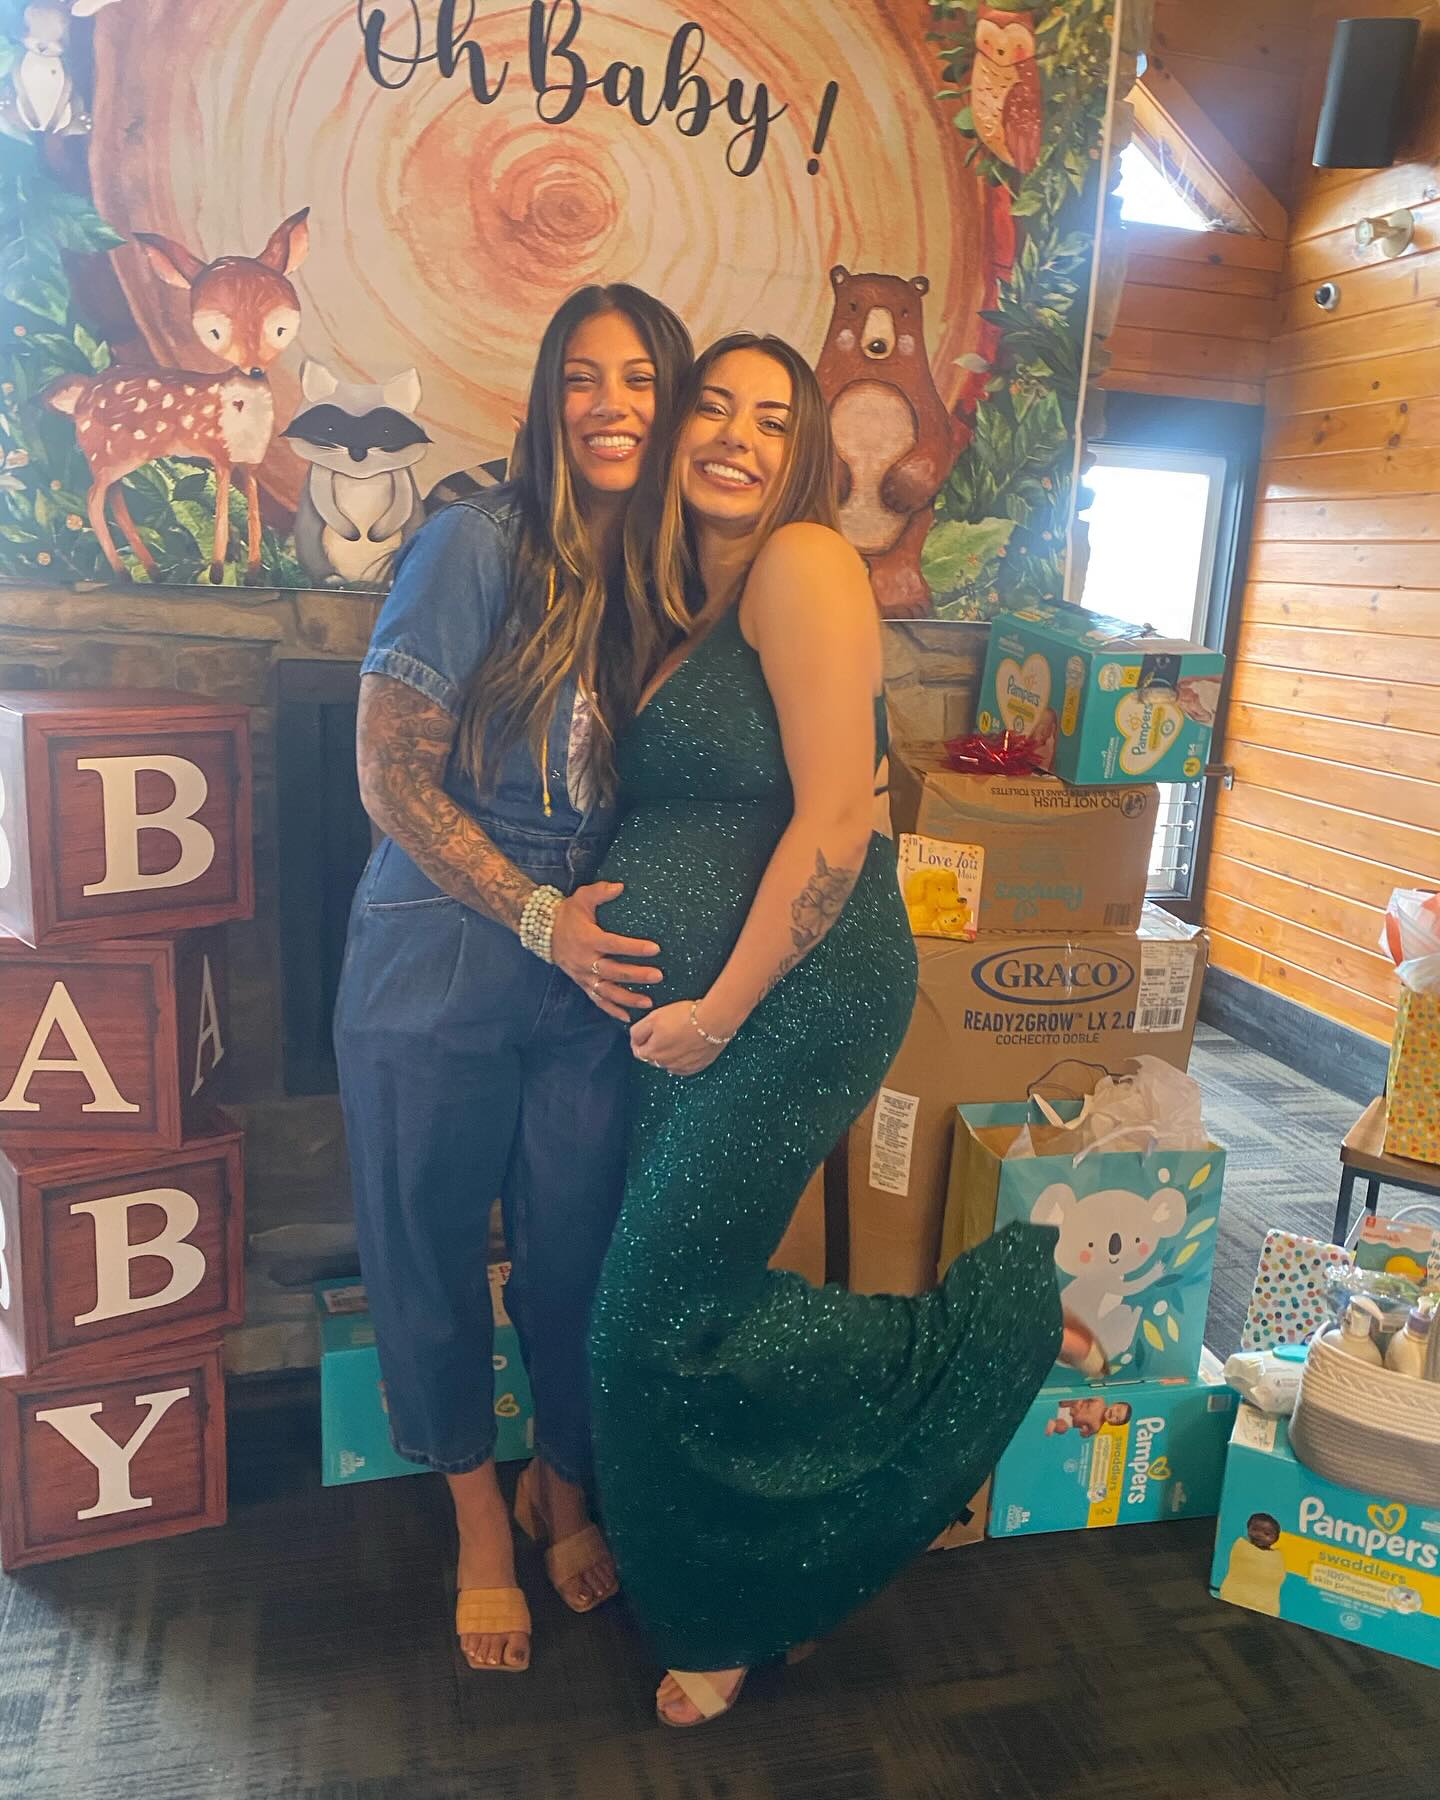 How lucky are we to have each other and celebrate YOU Kim! 

Cannot wait for BABIES 🥹🤍